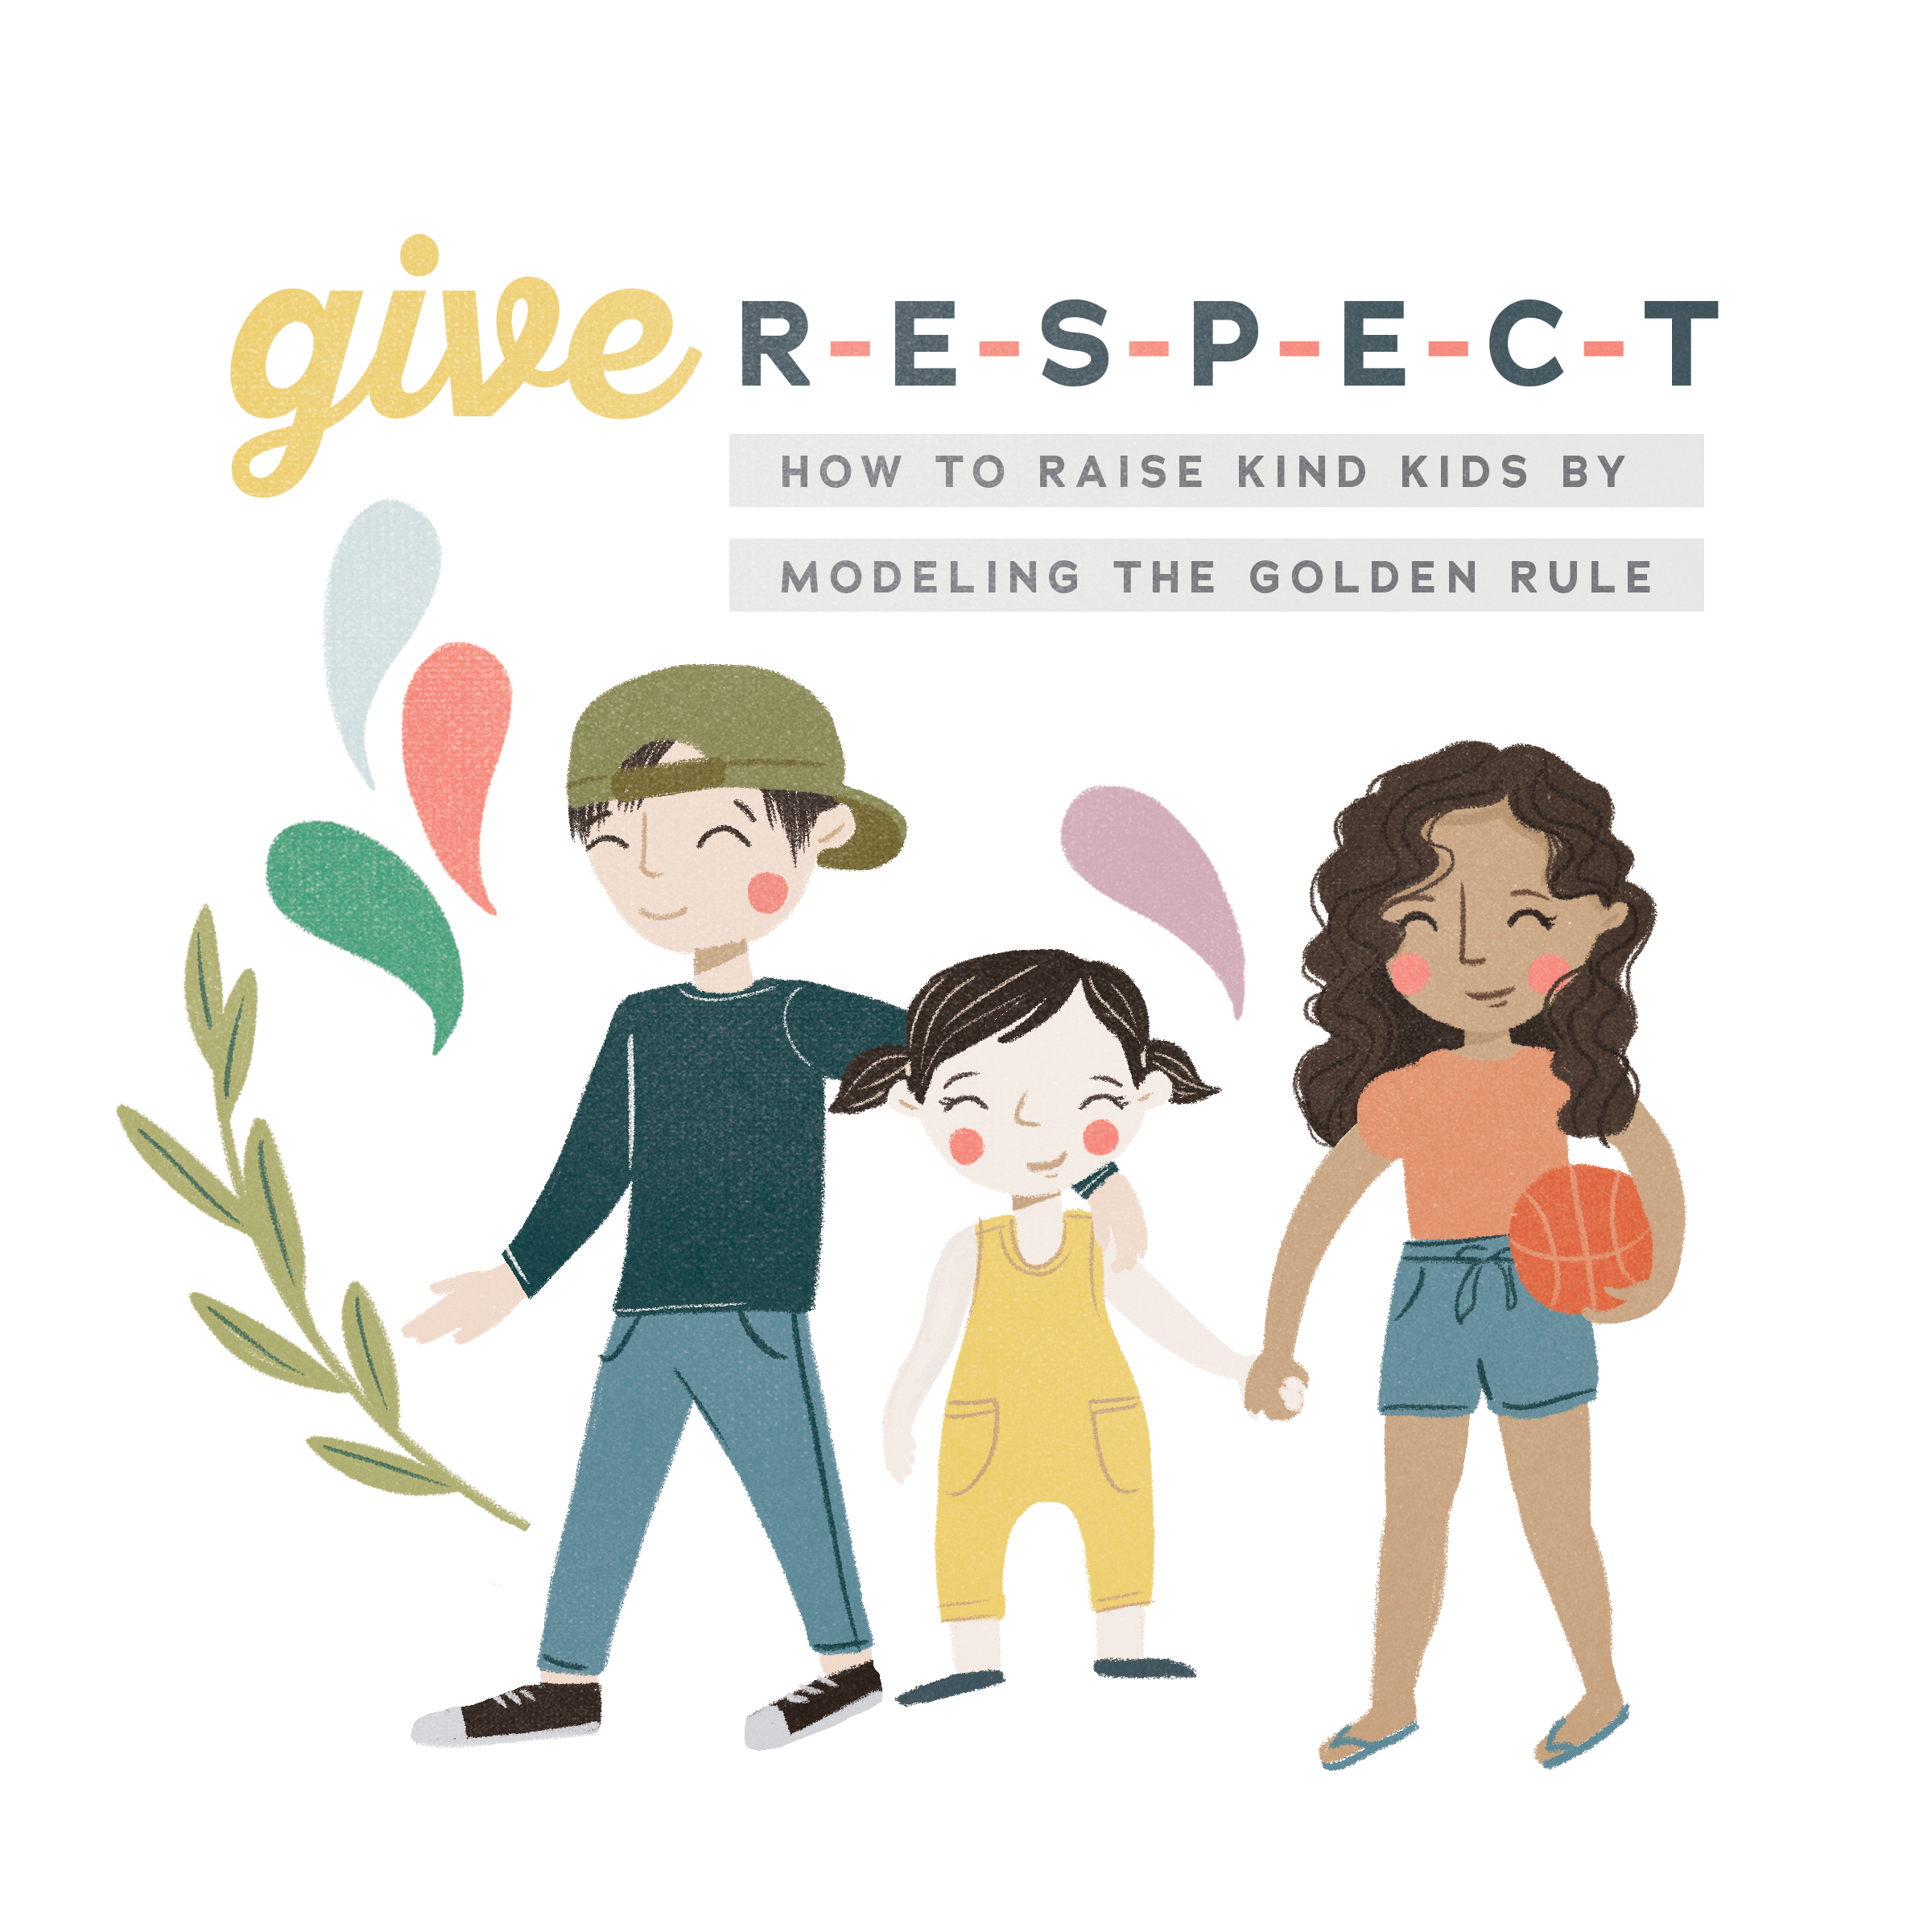 Give R-E-S-P-E-C-T: How to raise kind kids by modeling the Golden Rule